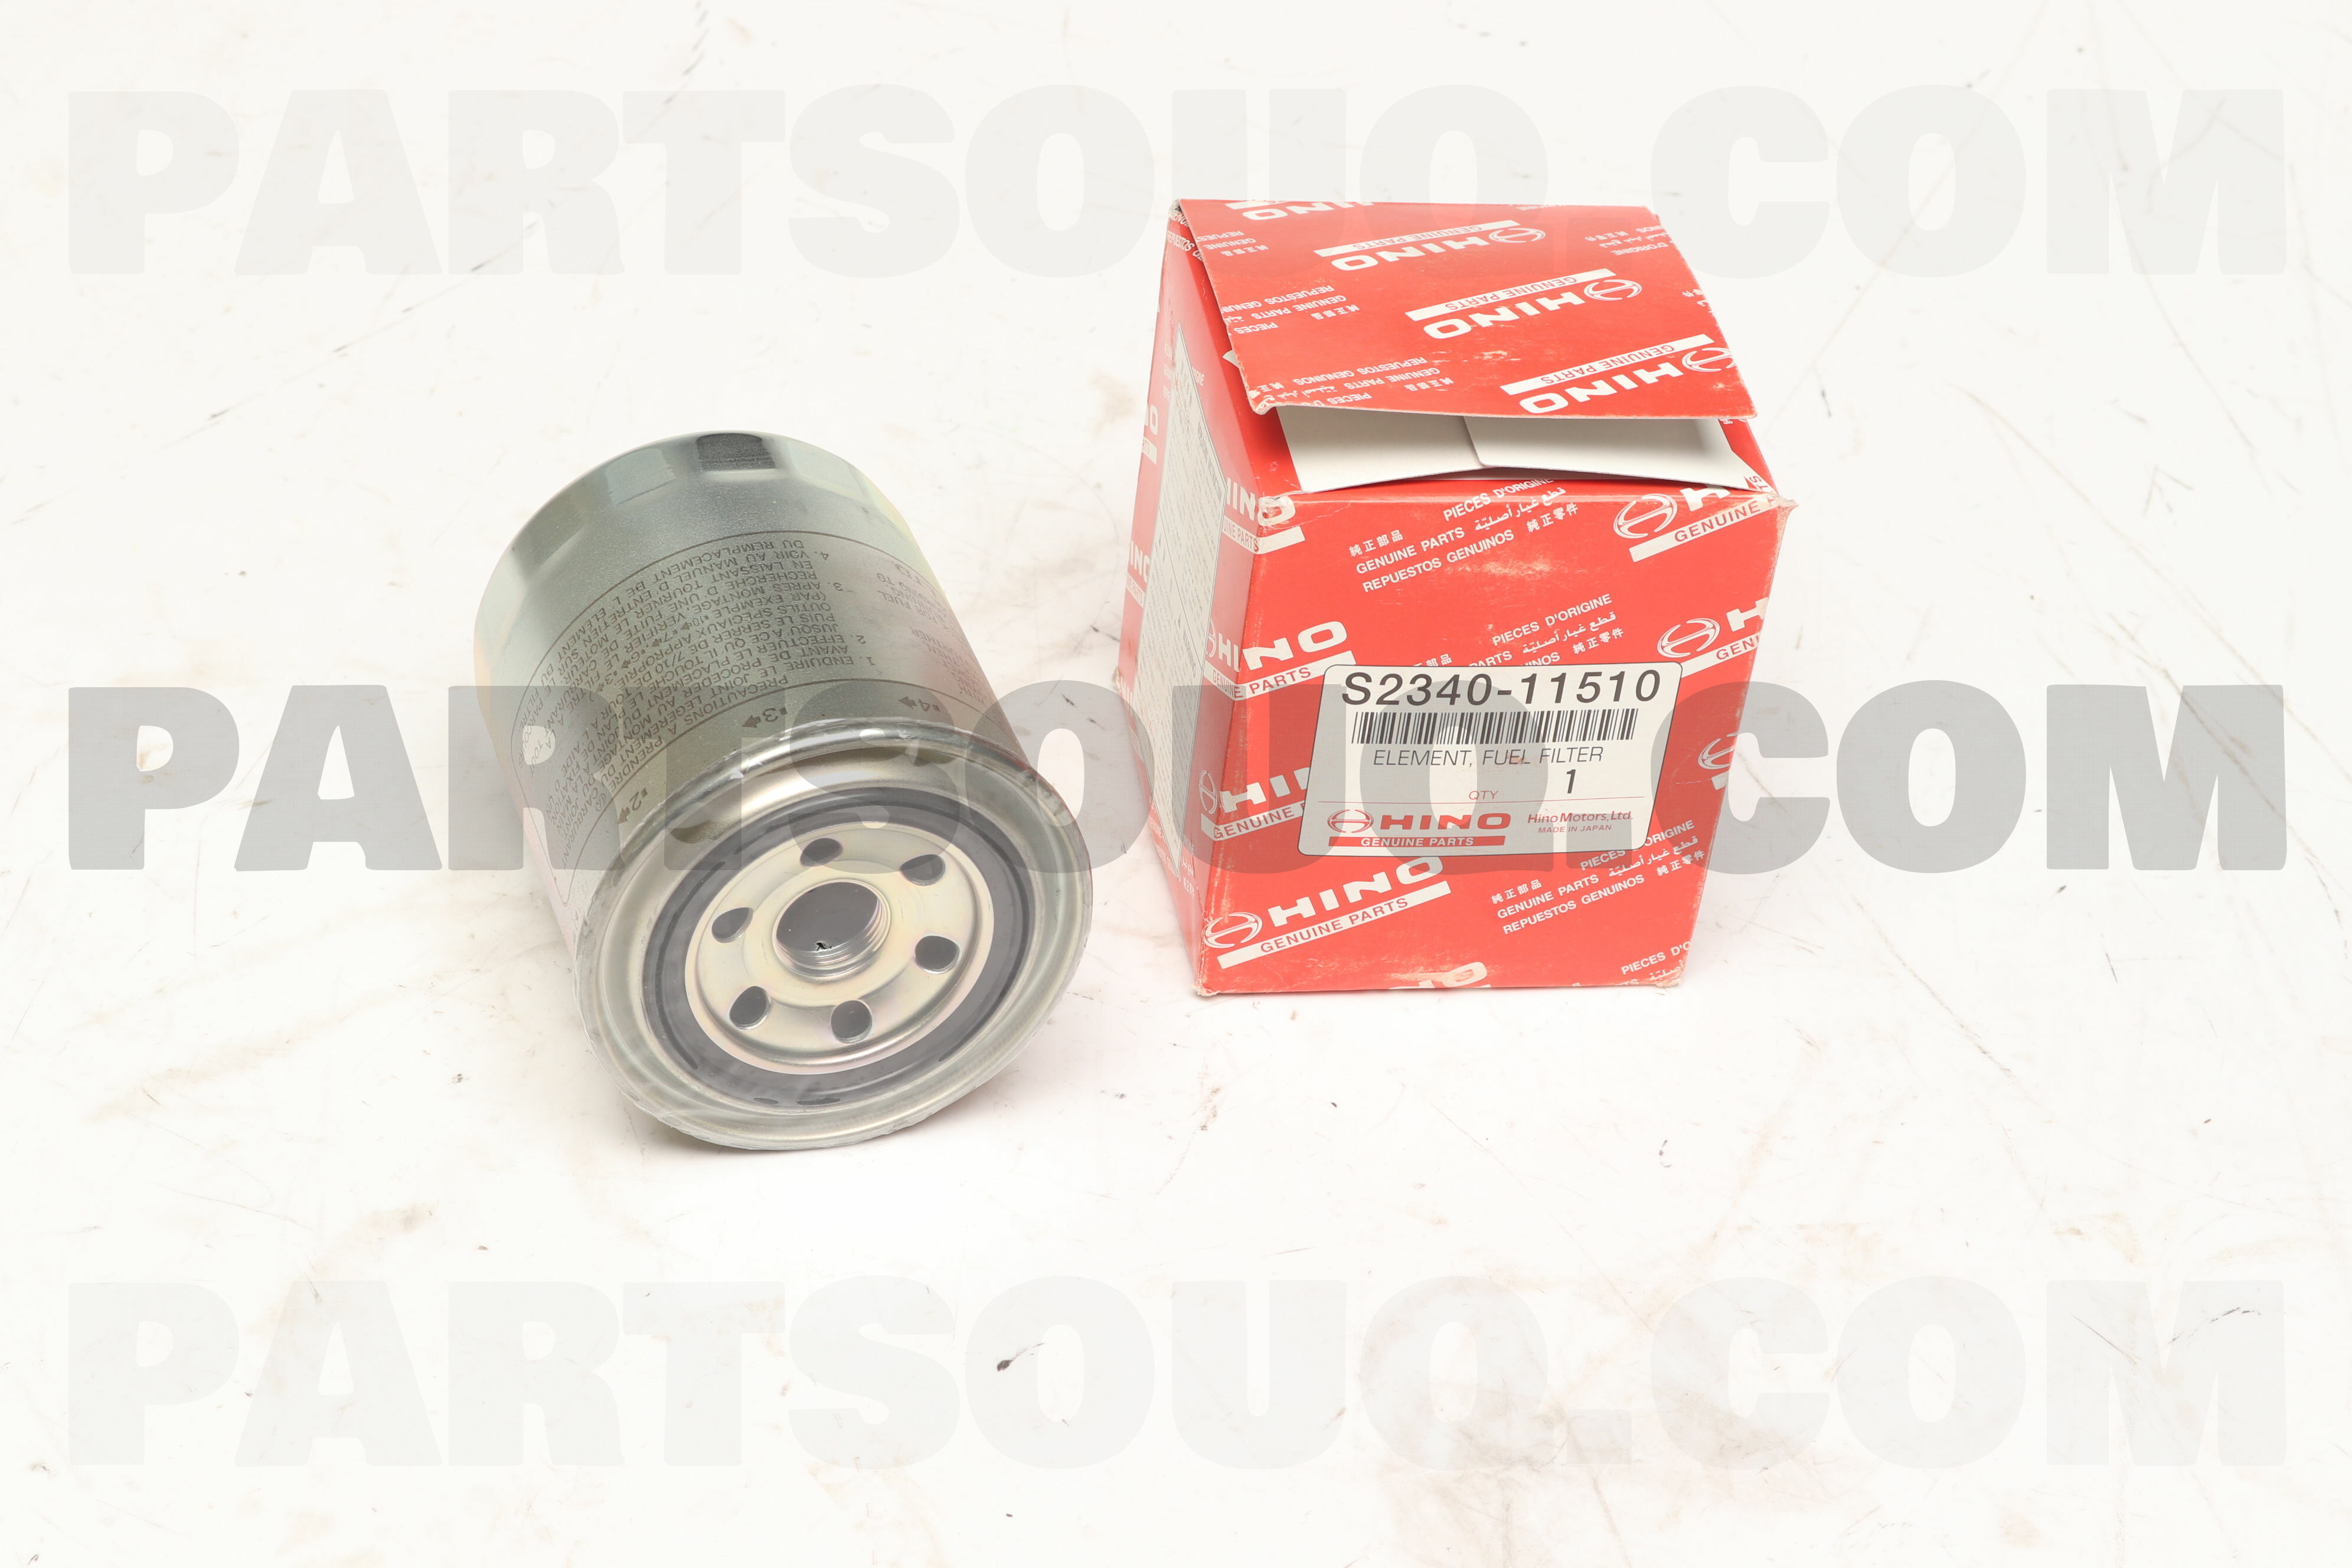 Forklift Fuel Filter Hino S2340-11510 Hacus Aftermarket New FPE 